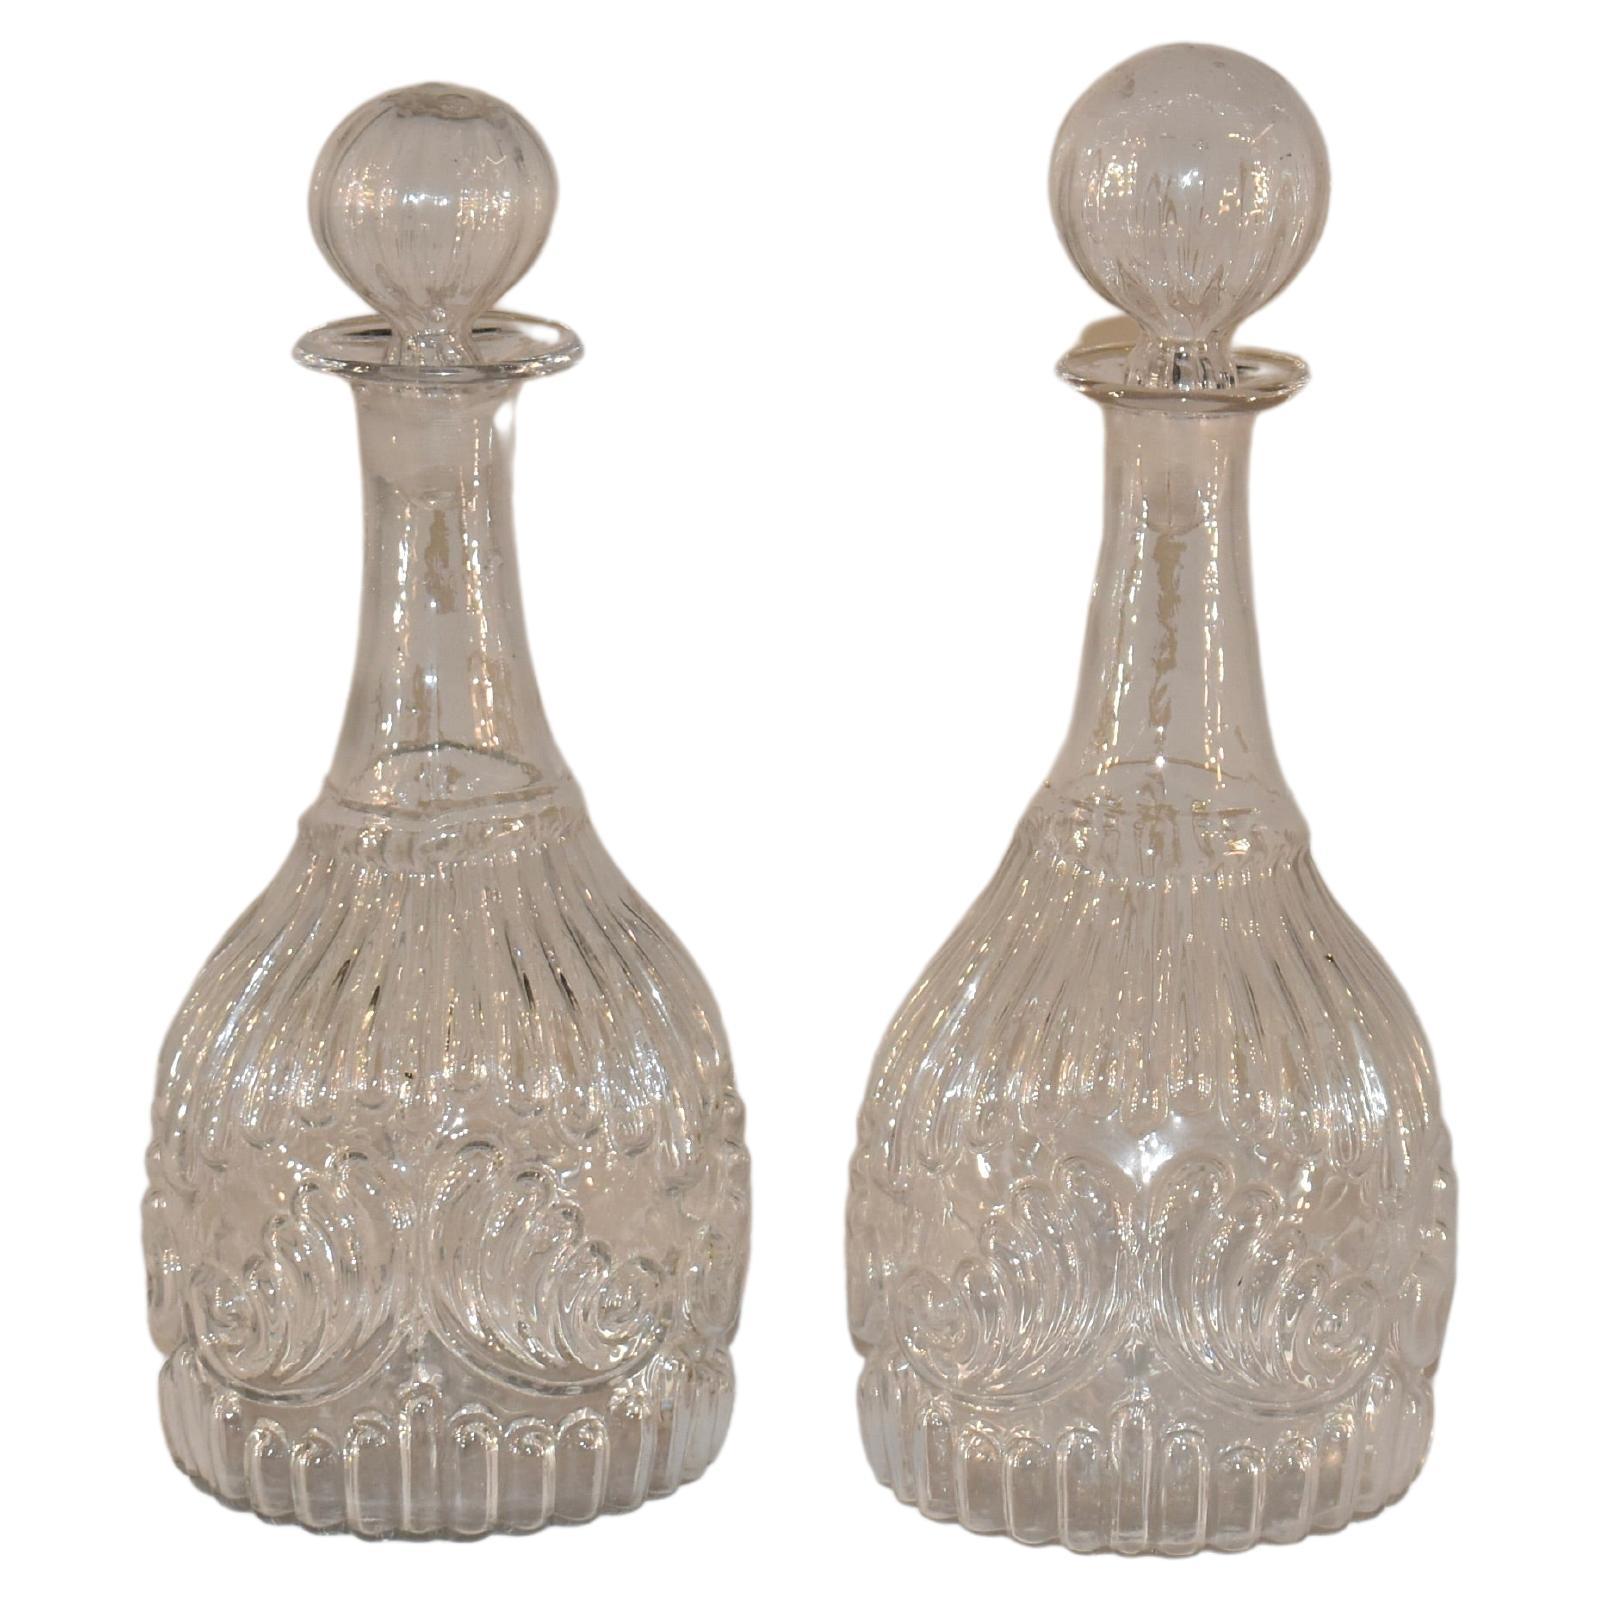 Pair of Early 19th Century American Mold Blown Decanters For Sale